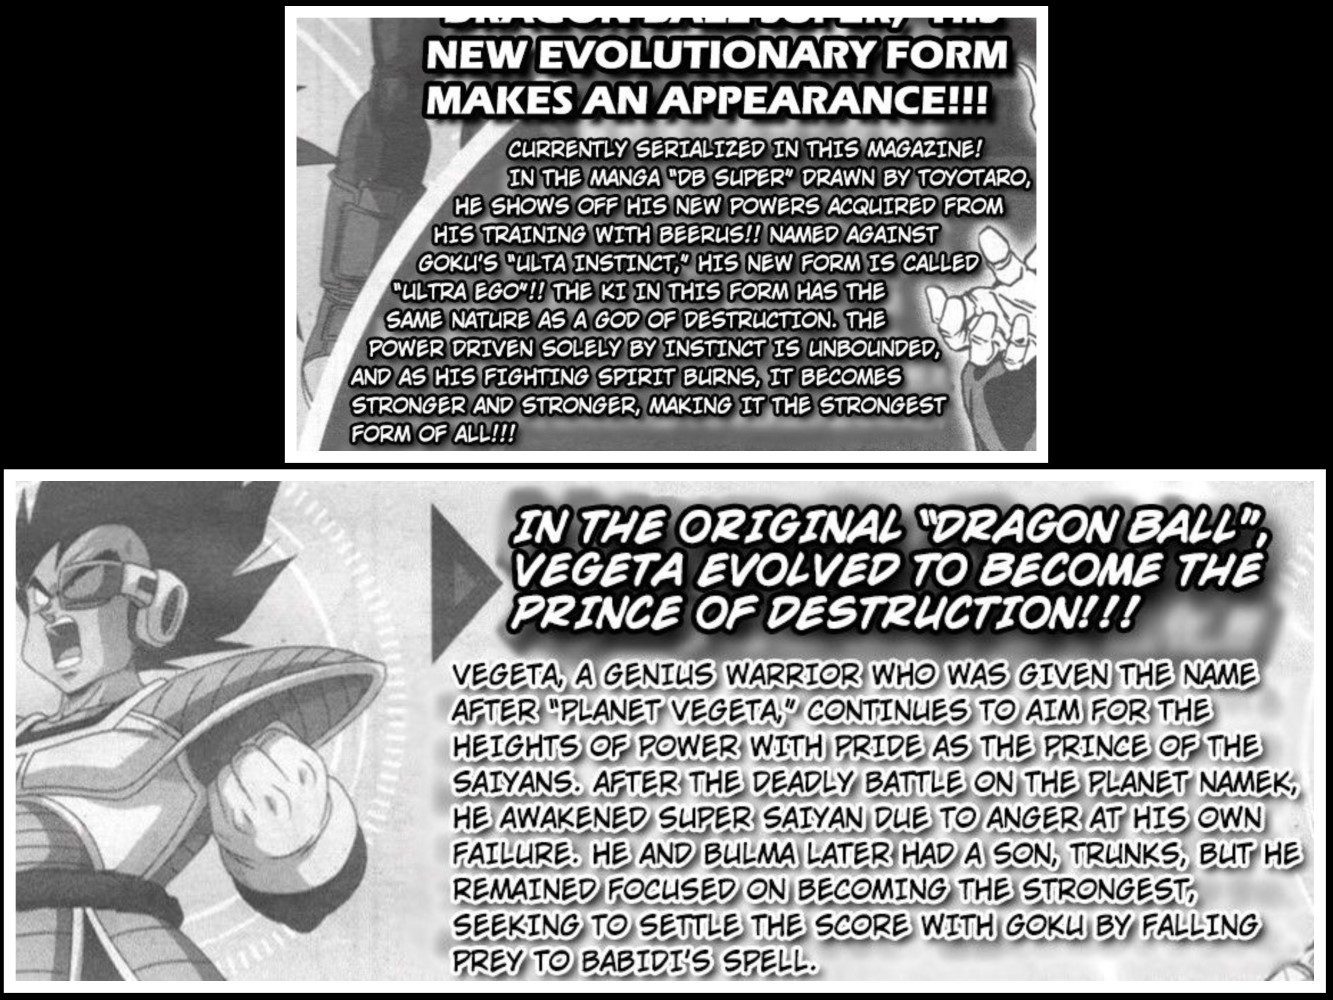 Vegeta described as the prince of destruction in a V-Jump article